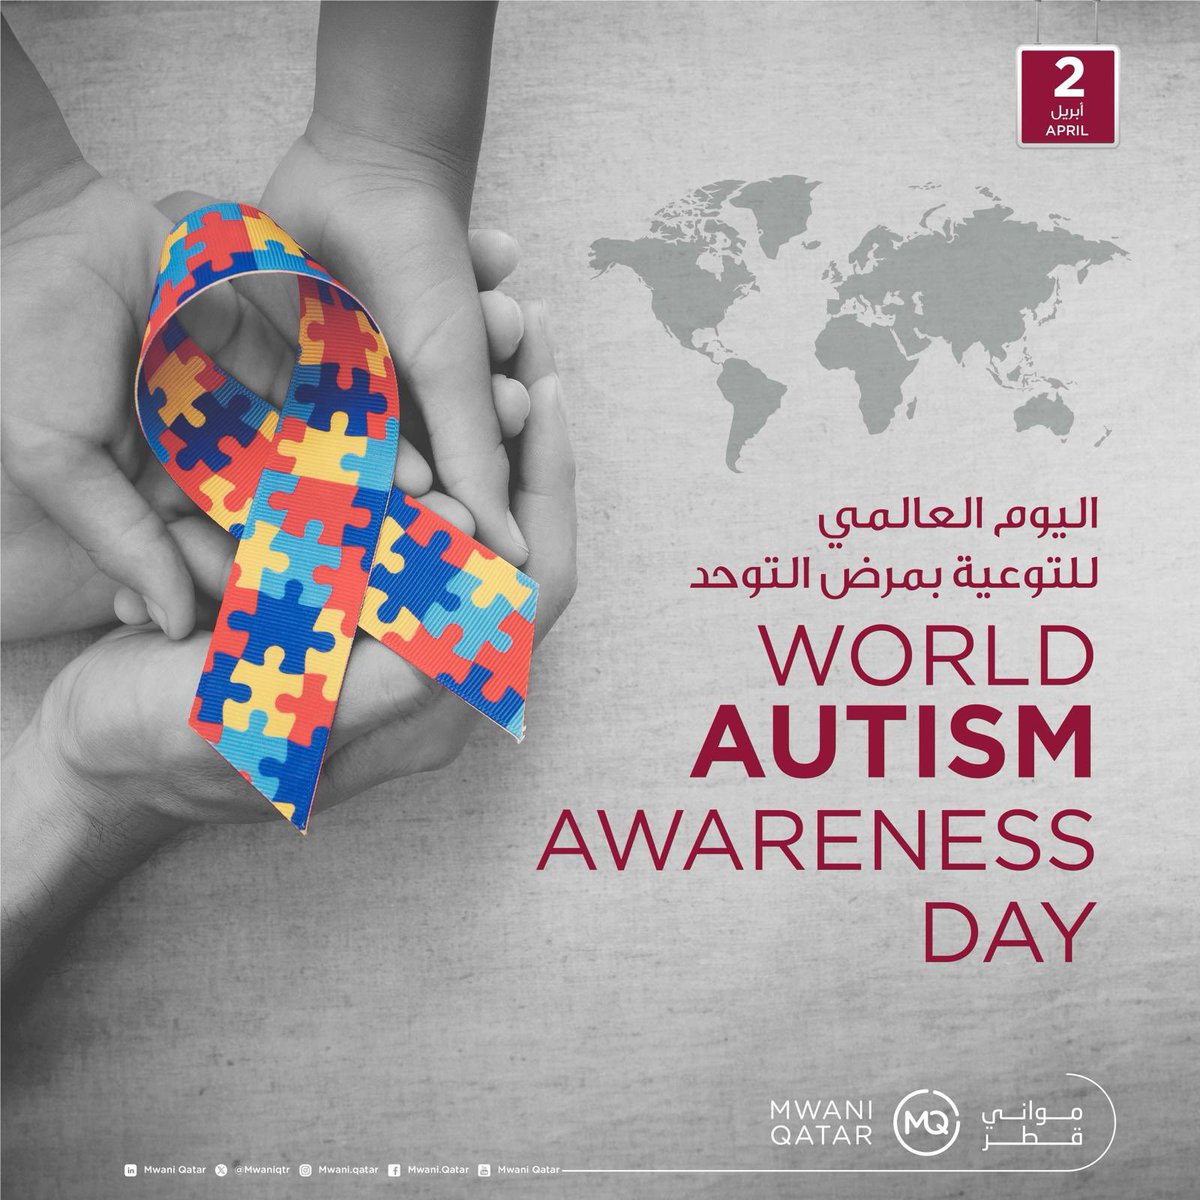 On this #WorldAutismAwarenessDay 🩵, show your solidarity and contribute to raising awareness about autism to create a more inclusive society that embraces, supports, and integrates individuals with autism. #MwaniQatar⚓️🚢 #Qatar🇶🇦.